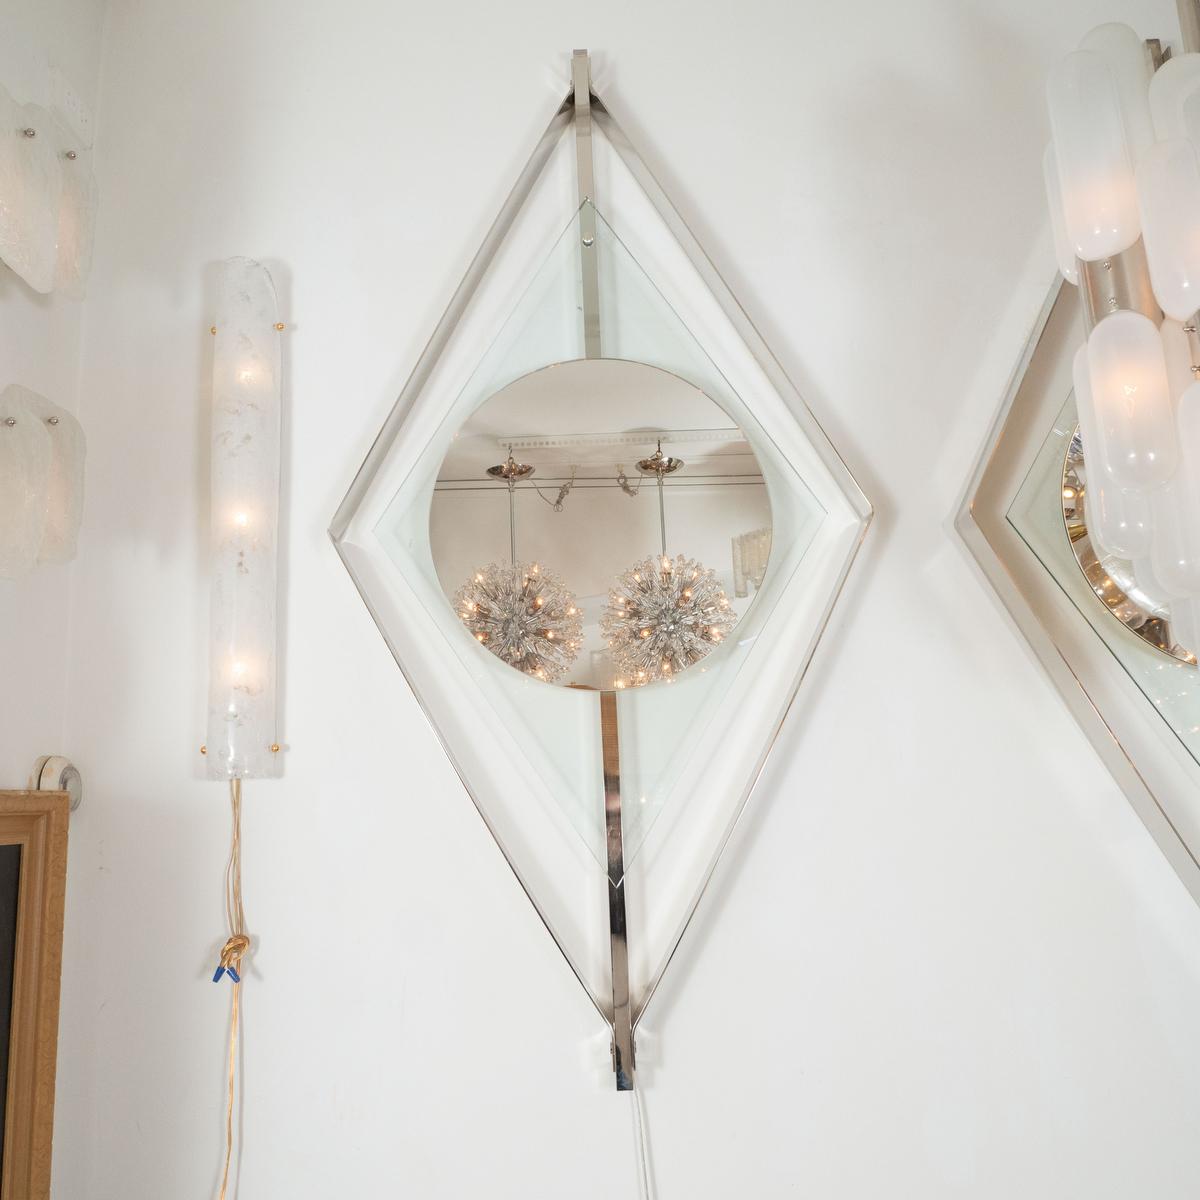 Polished nickel and clear glass floating surround mirror.